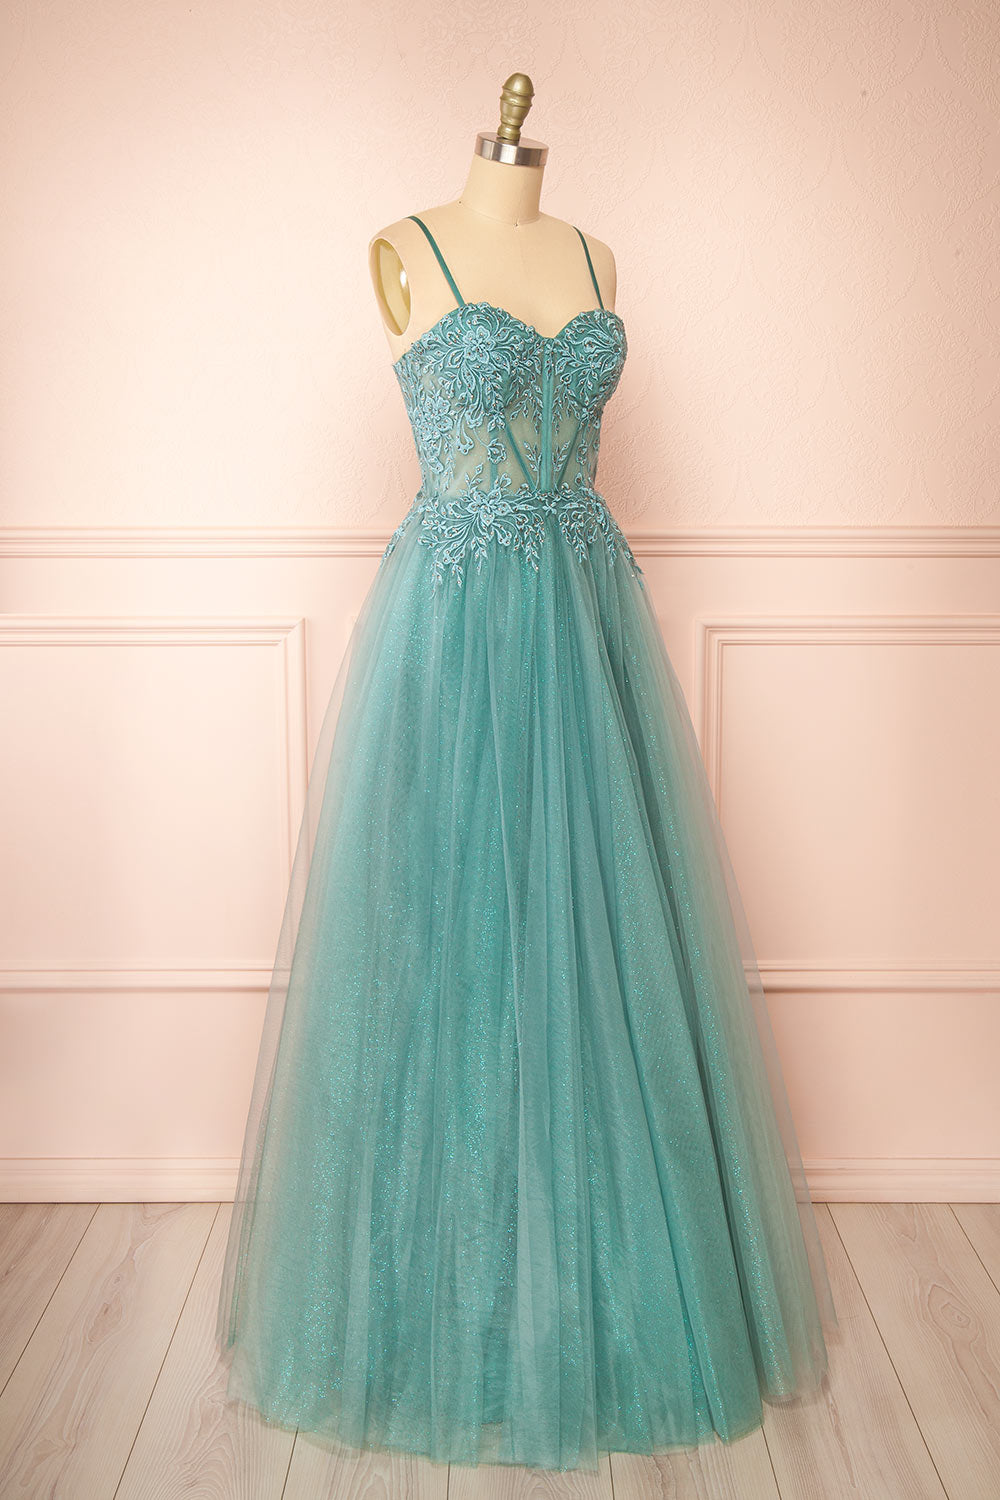 Penelope Sparkling Teal Maxi Tulle Dress | Boutique 1861  side view